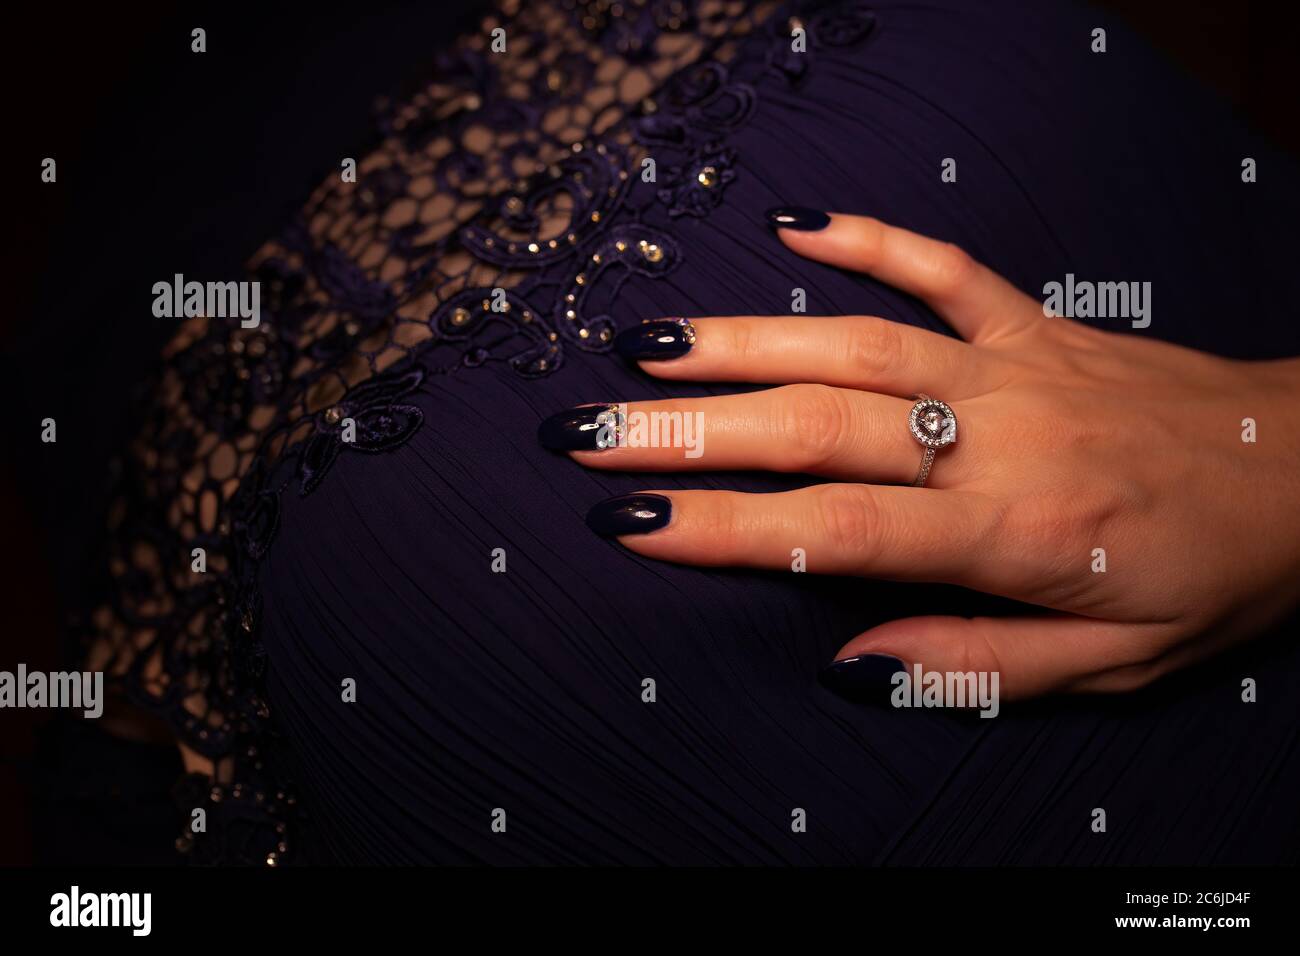 Young Woman`s hand with long blue manicure resting on matching evening dress Stock Photo